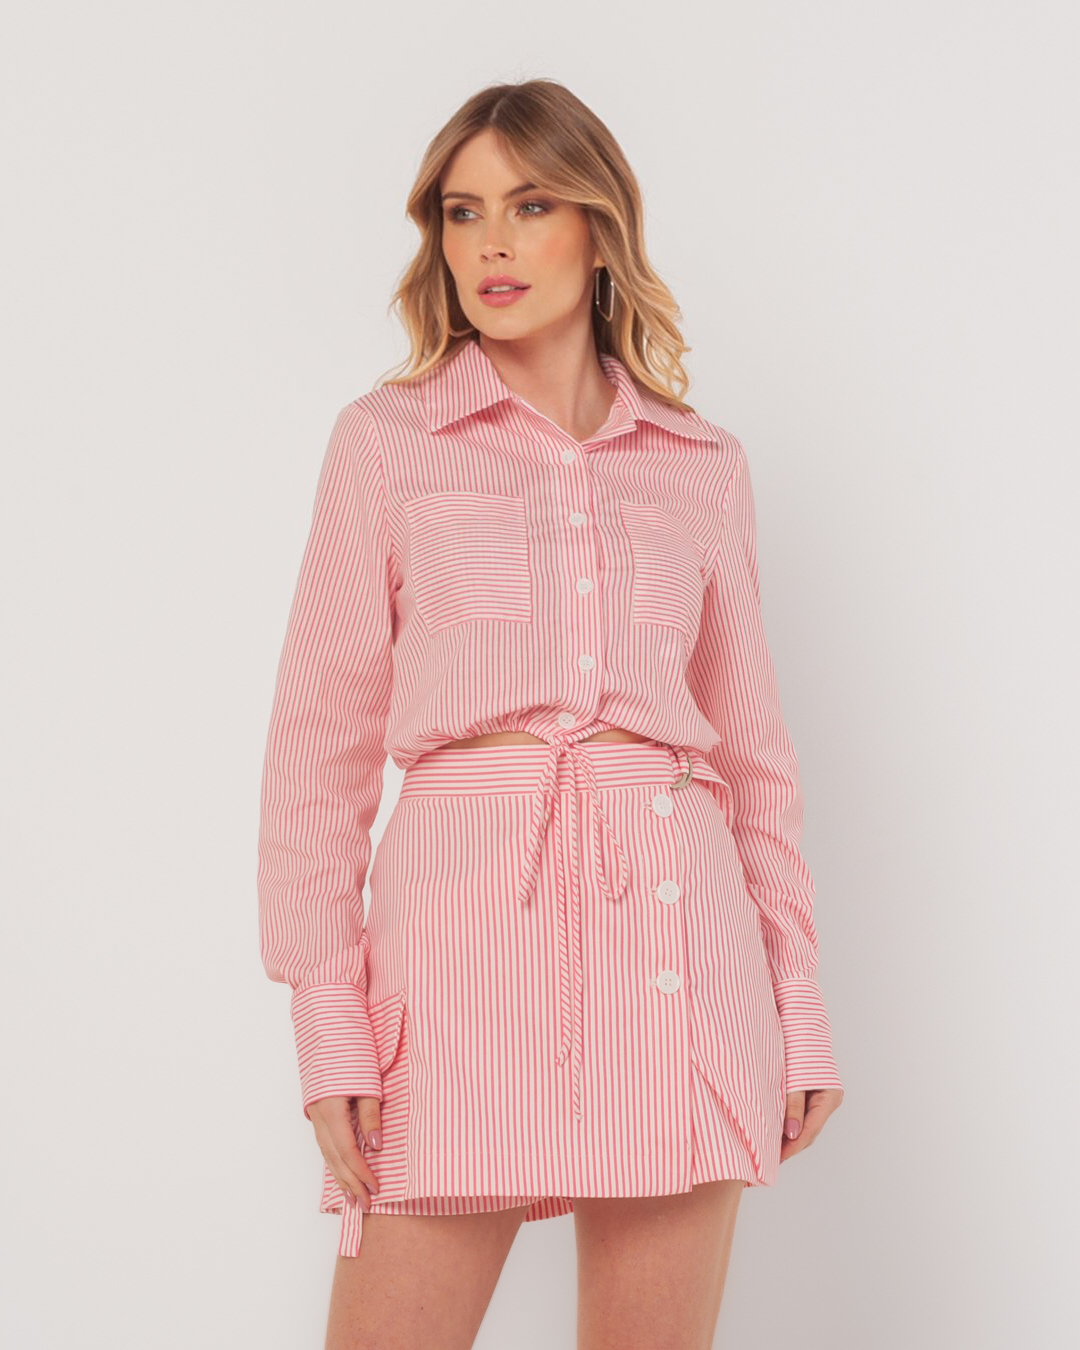 Miss Misses - Miss Misses Striped Cropped Shirt With Pink Pocket - 54090ROSA